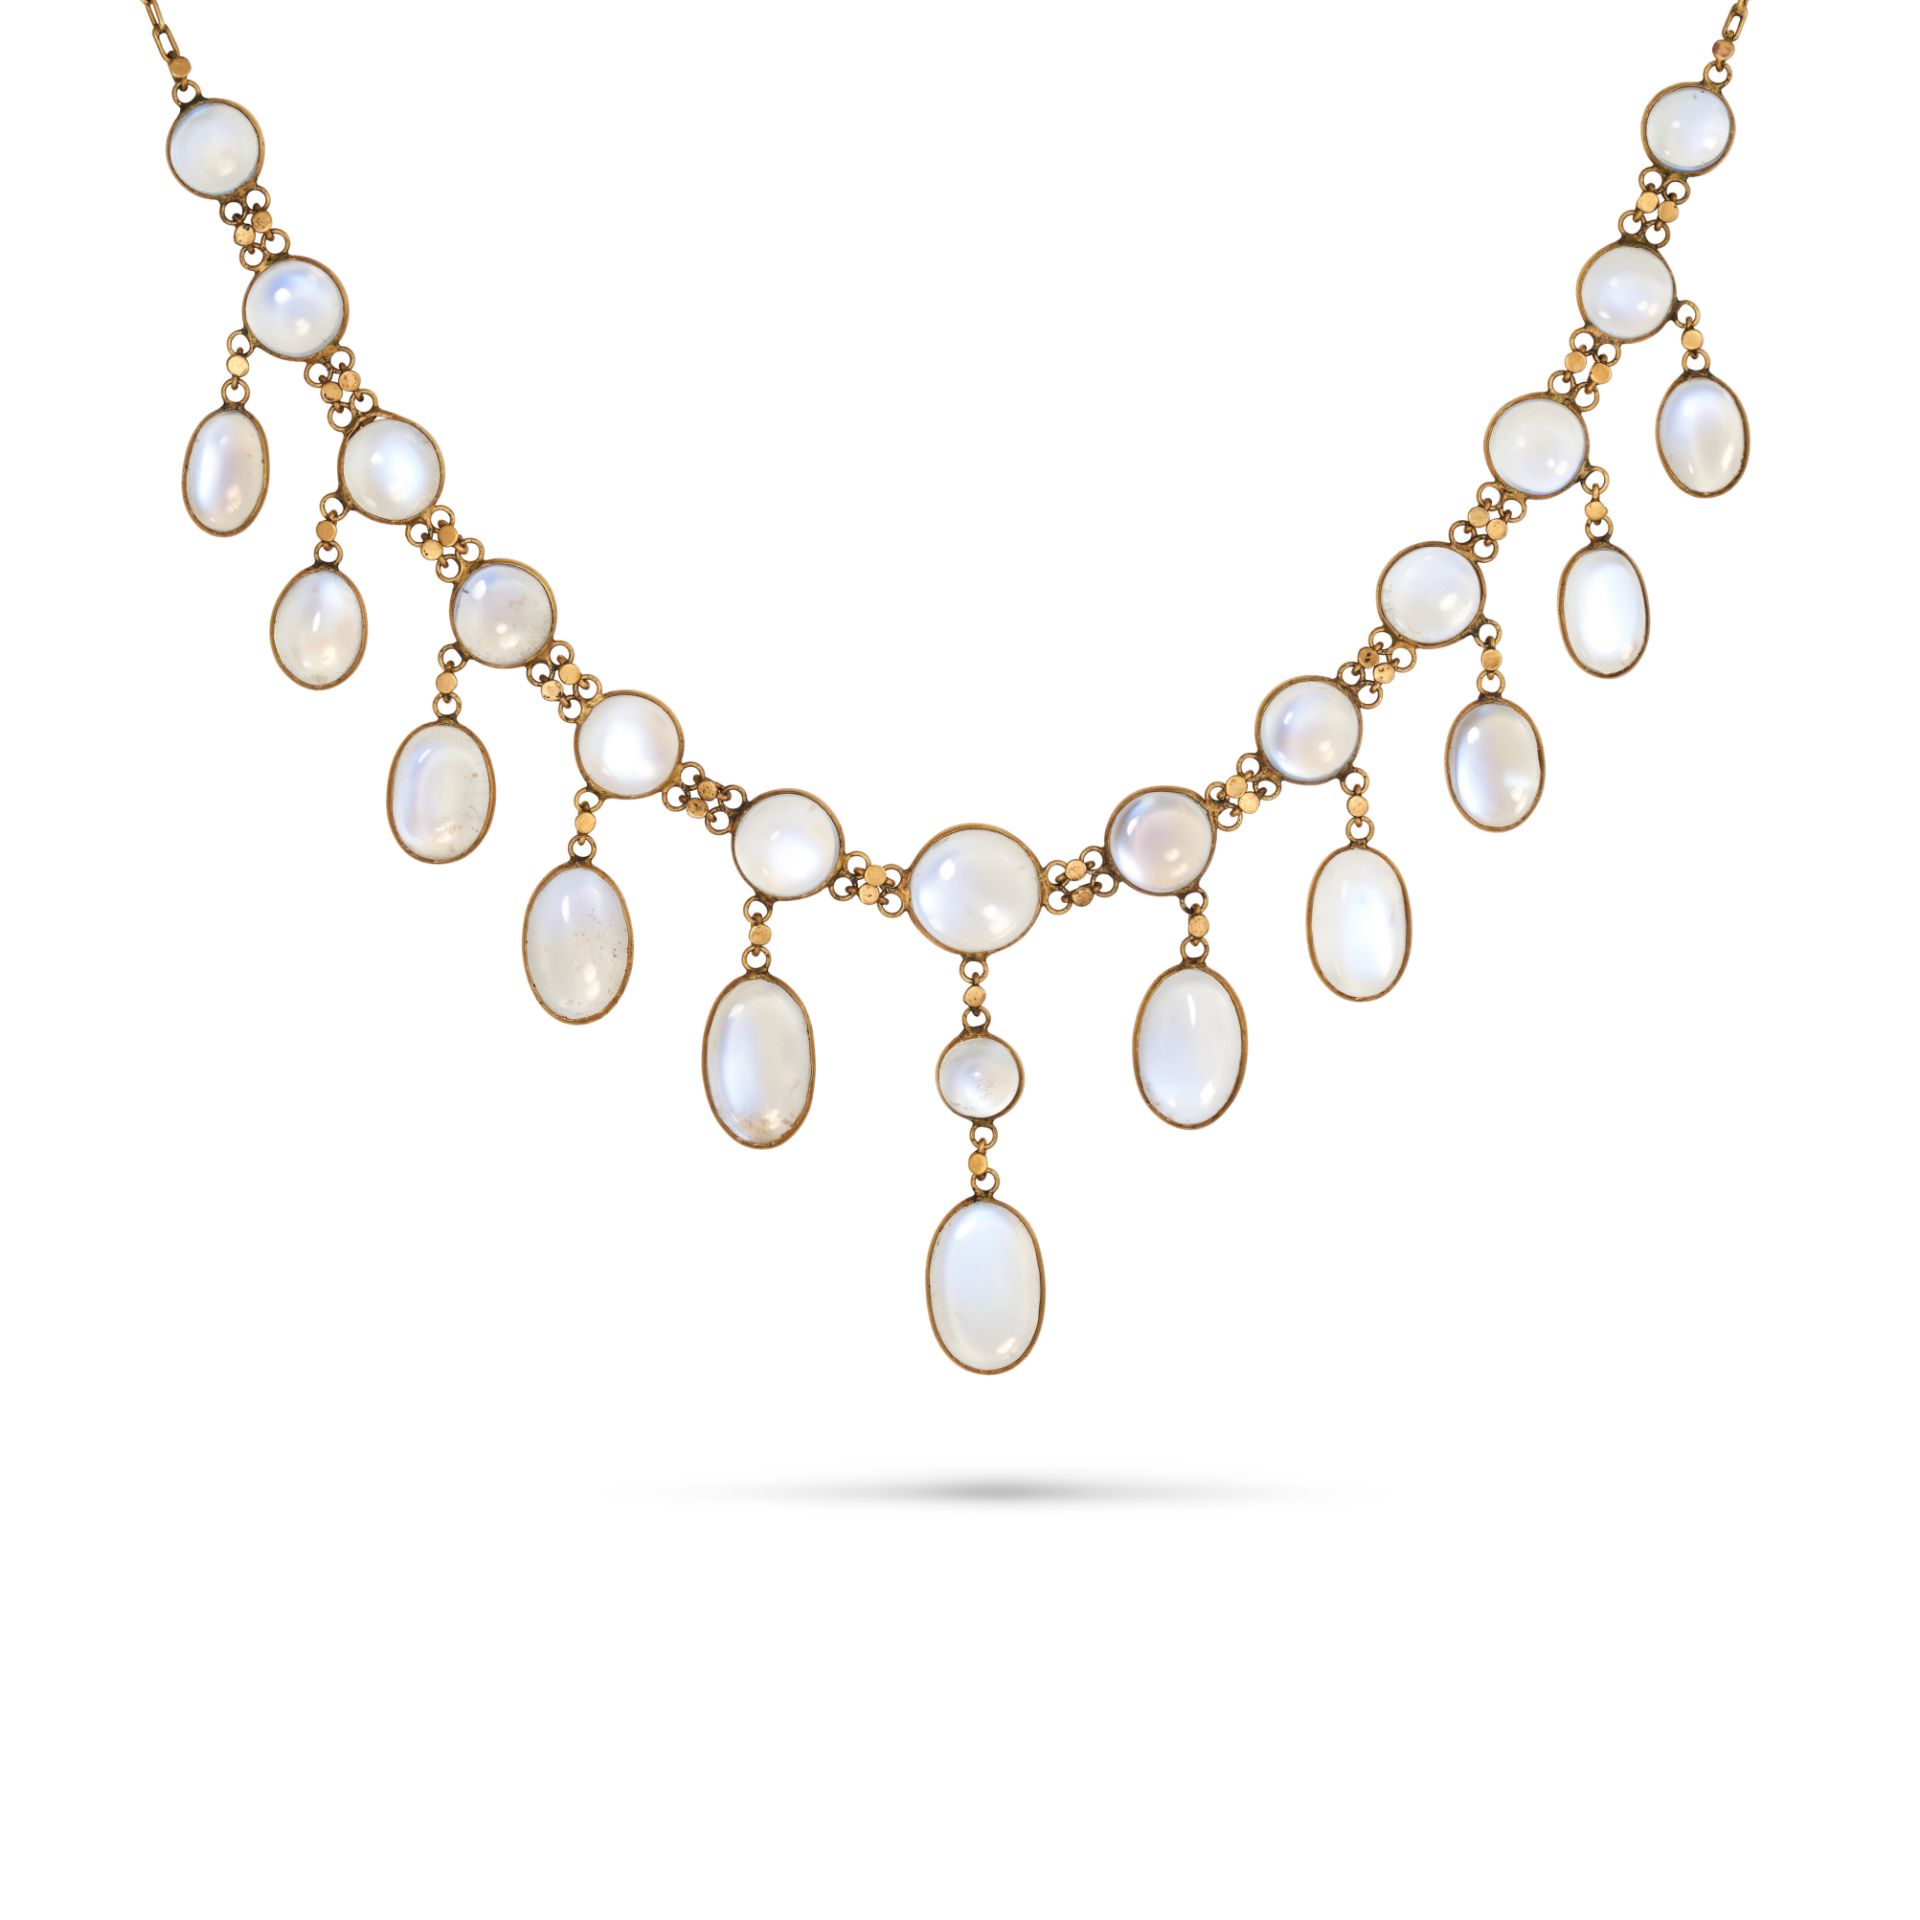 AN ANTIQUE MOONSTONE FRINGE NECKLACE in yellow gold, set with a row of round cabochon moonstones,...